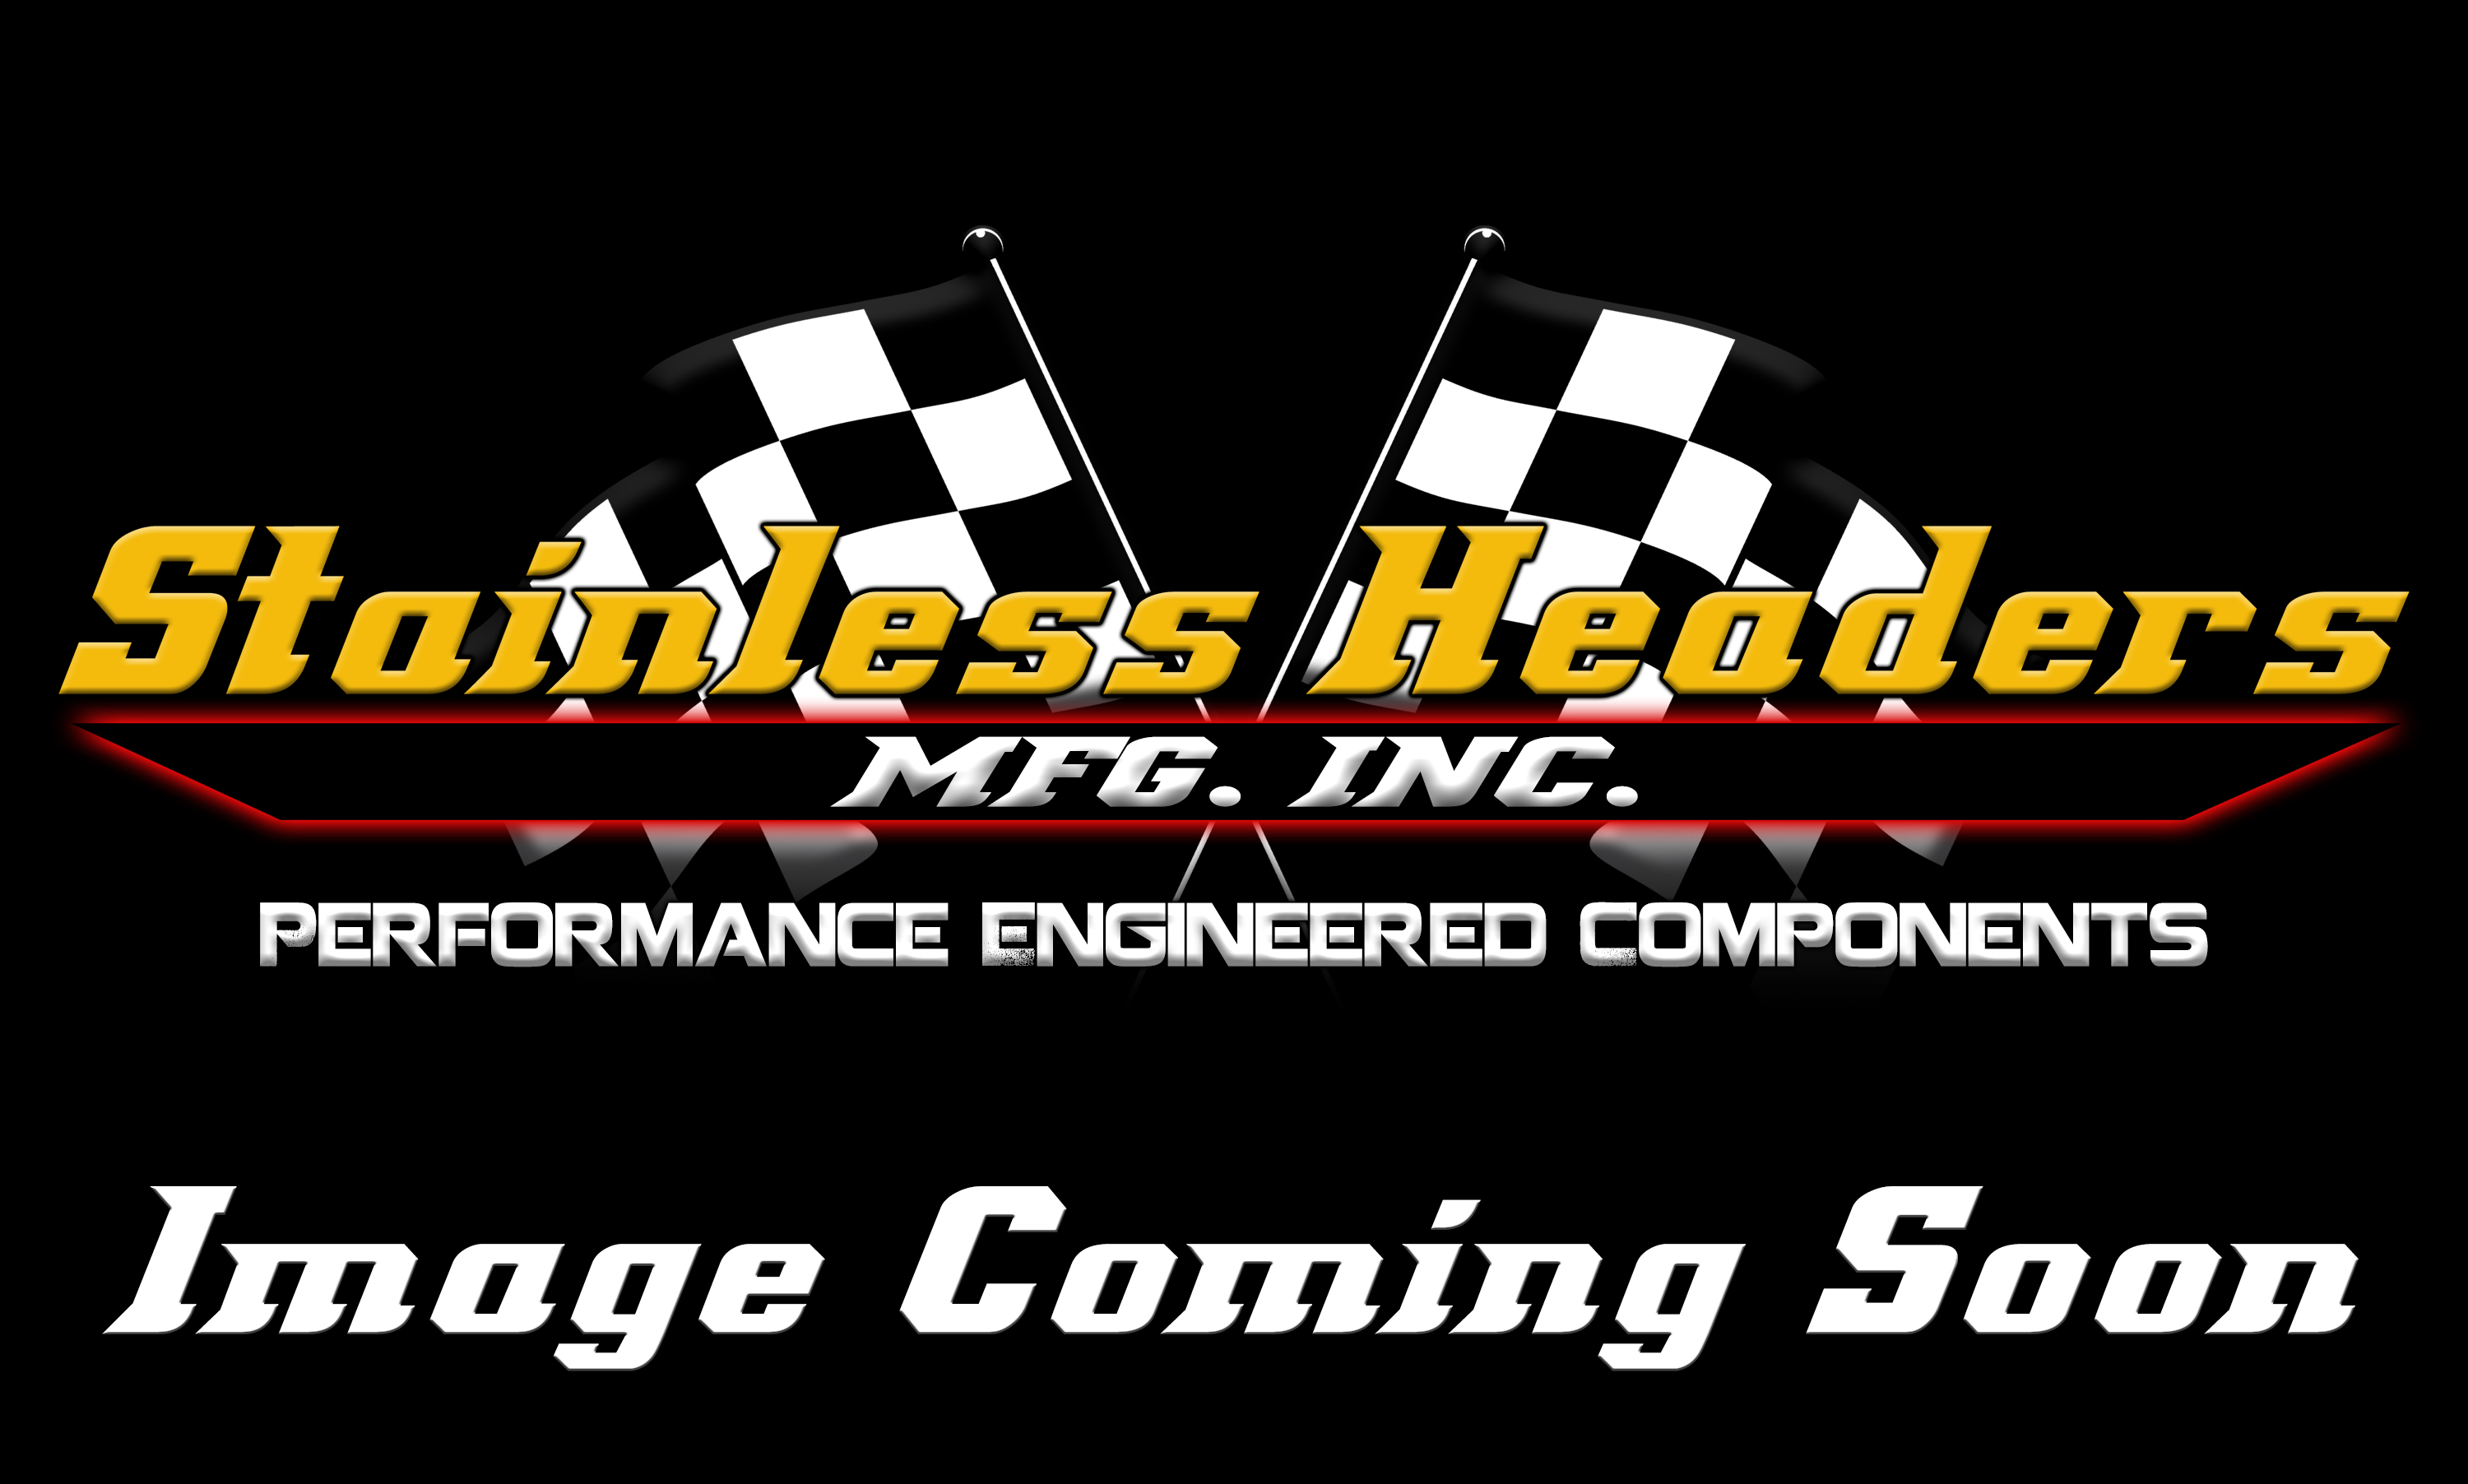 CompTurbo Technologies - CTR4202R-7285 Mid Frame Oil-Less 3.0 Turbocharger (1250 HP) - Image 1